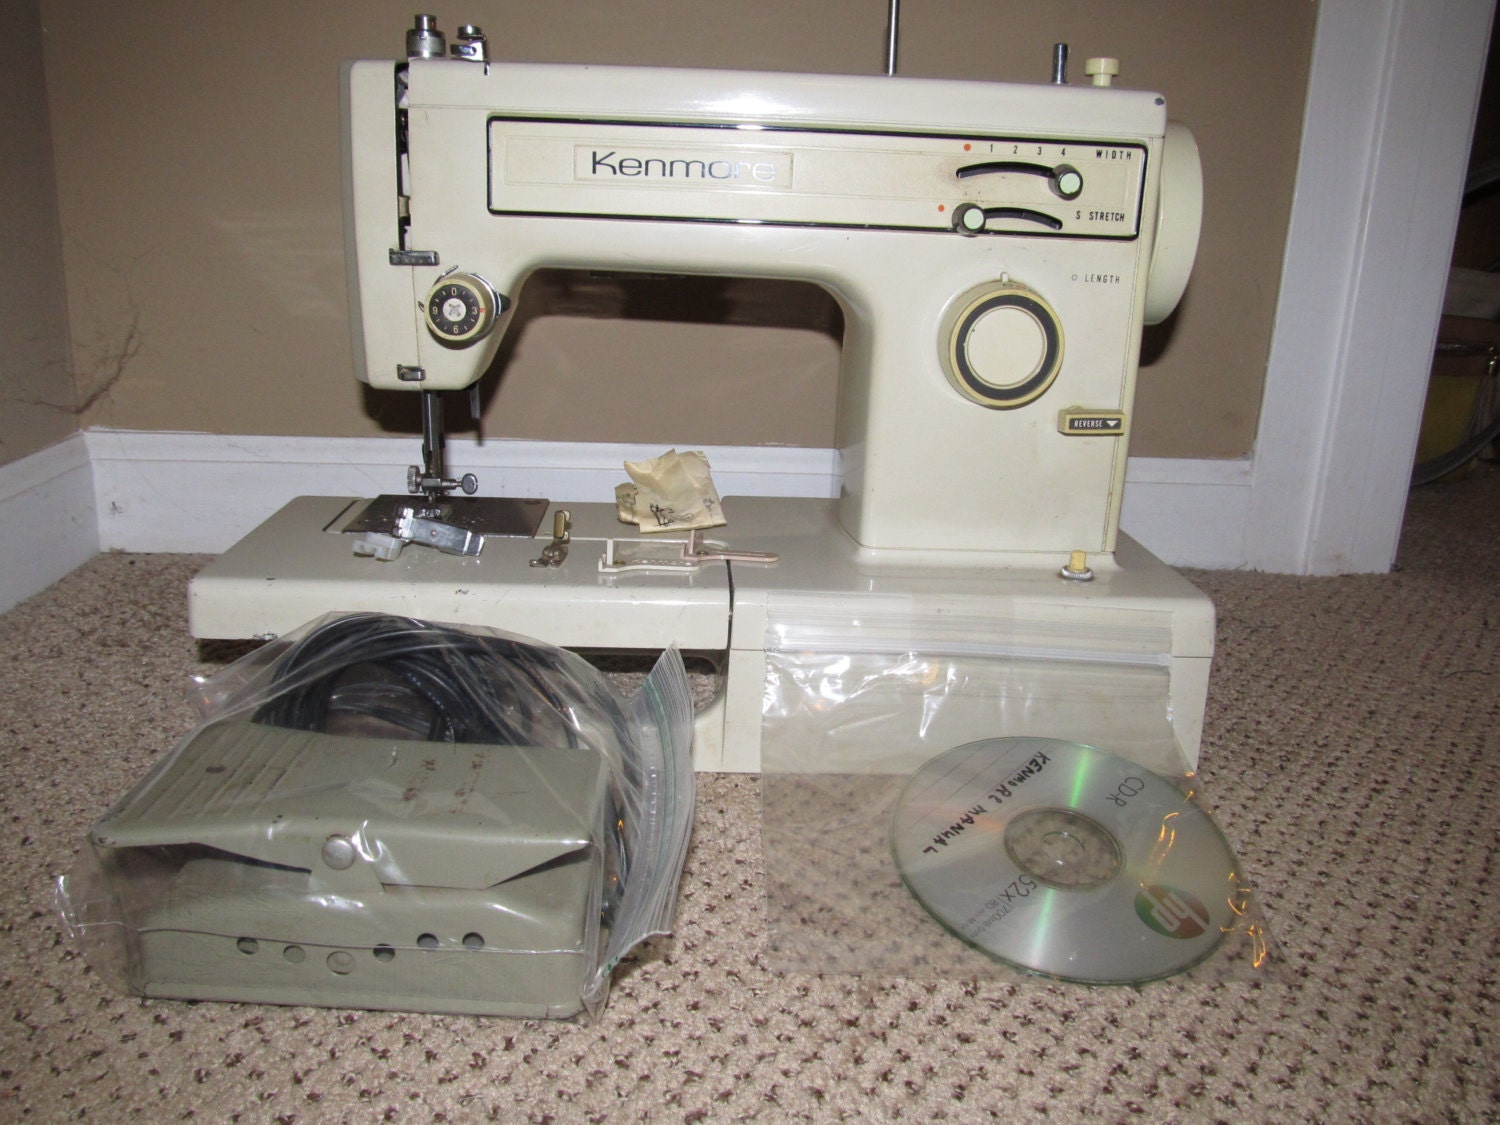 Sears Kenmore Sewing Machine Instructions 158132001500 x 1125